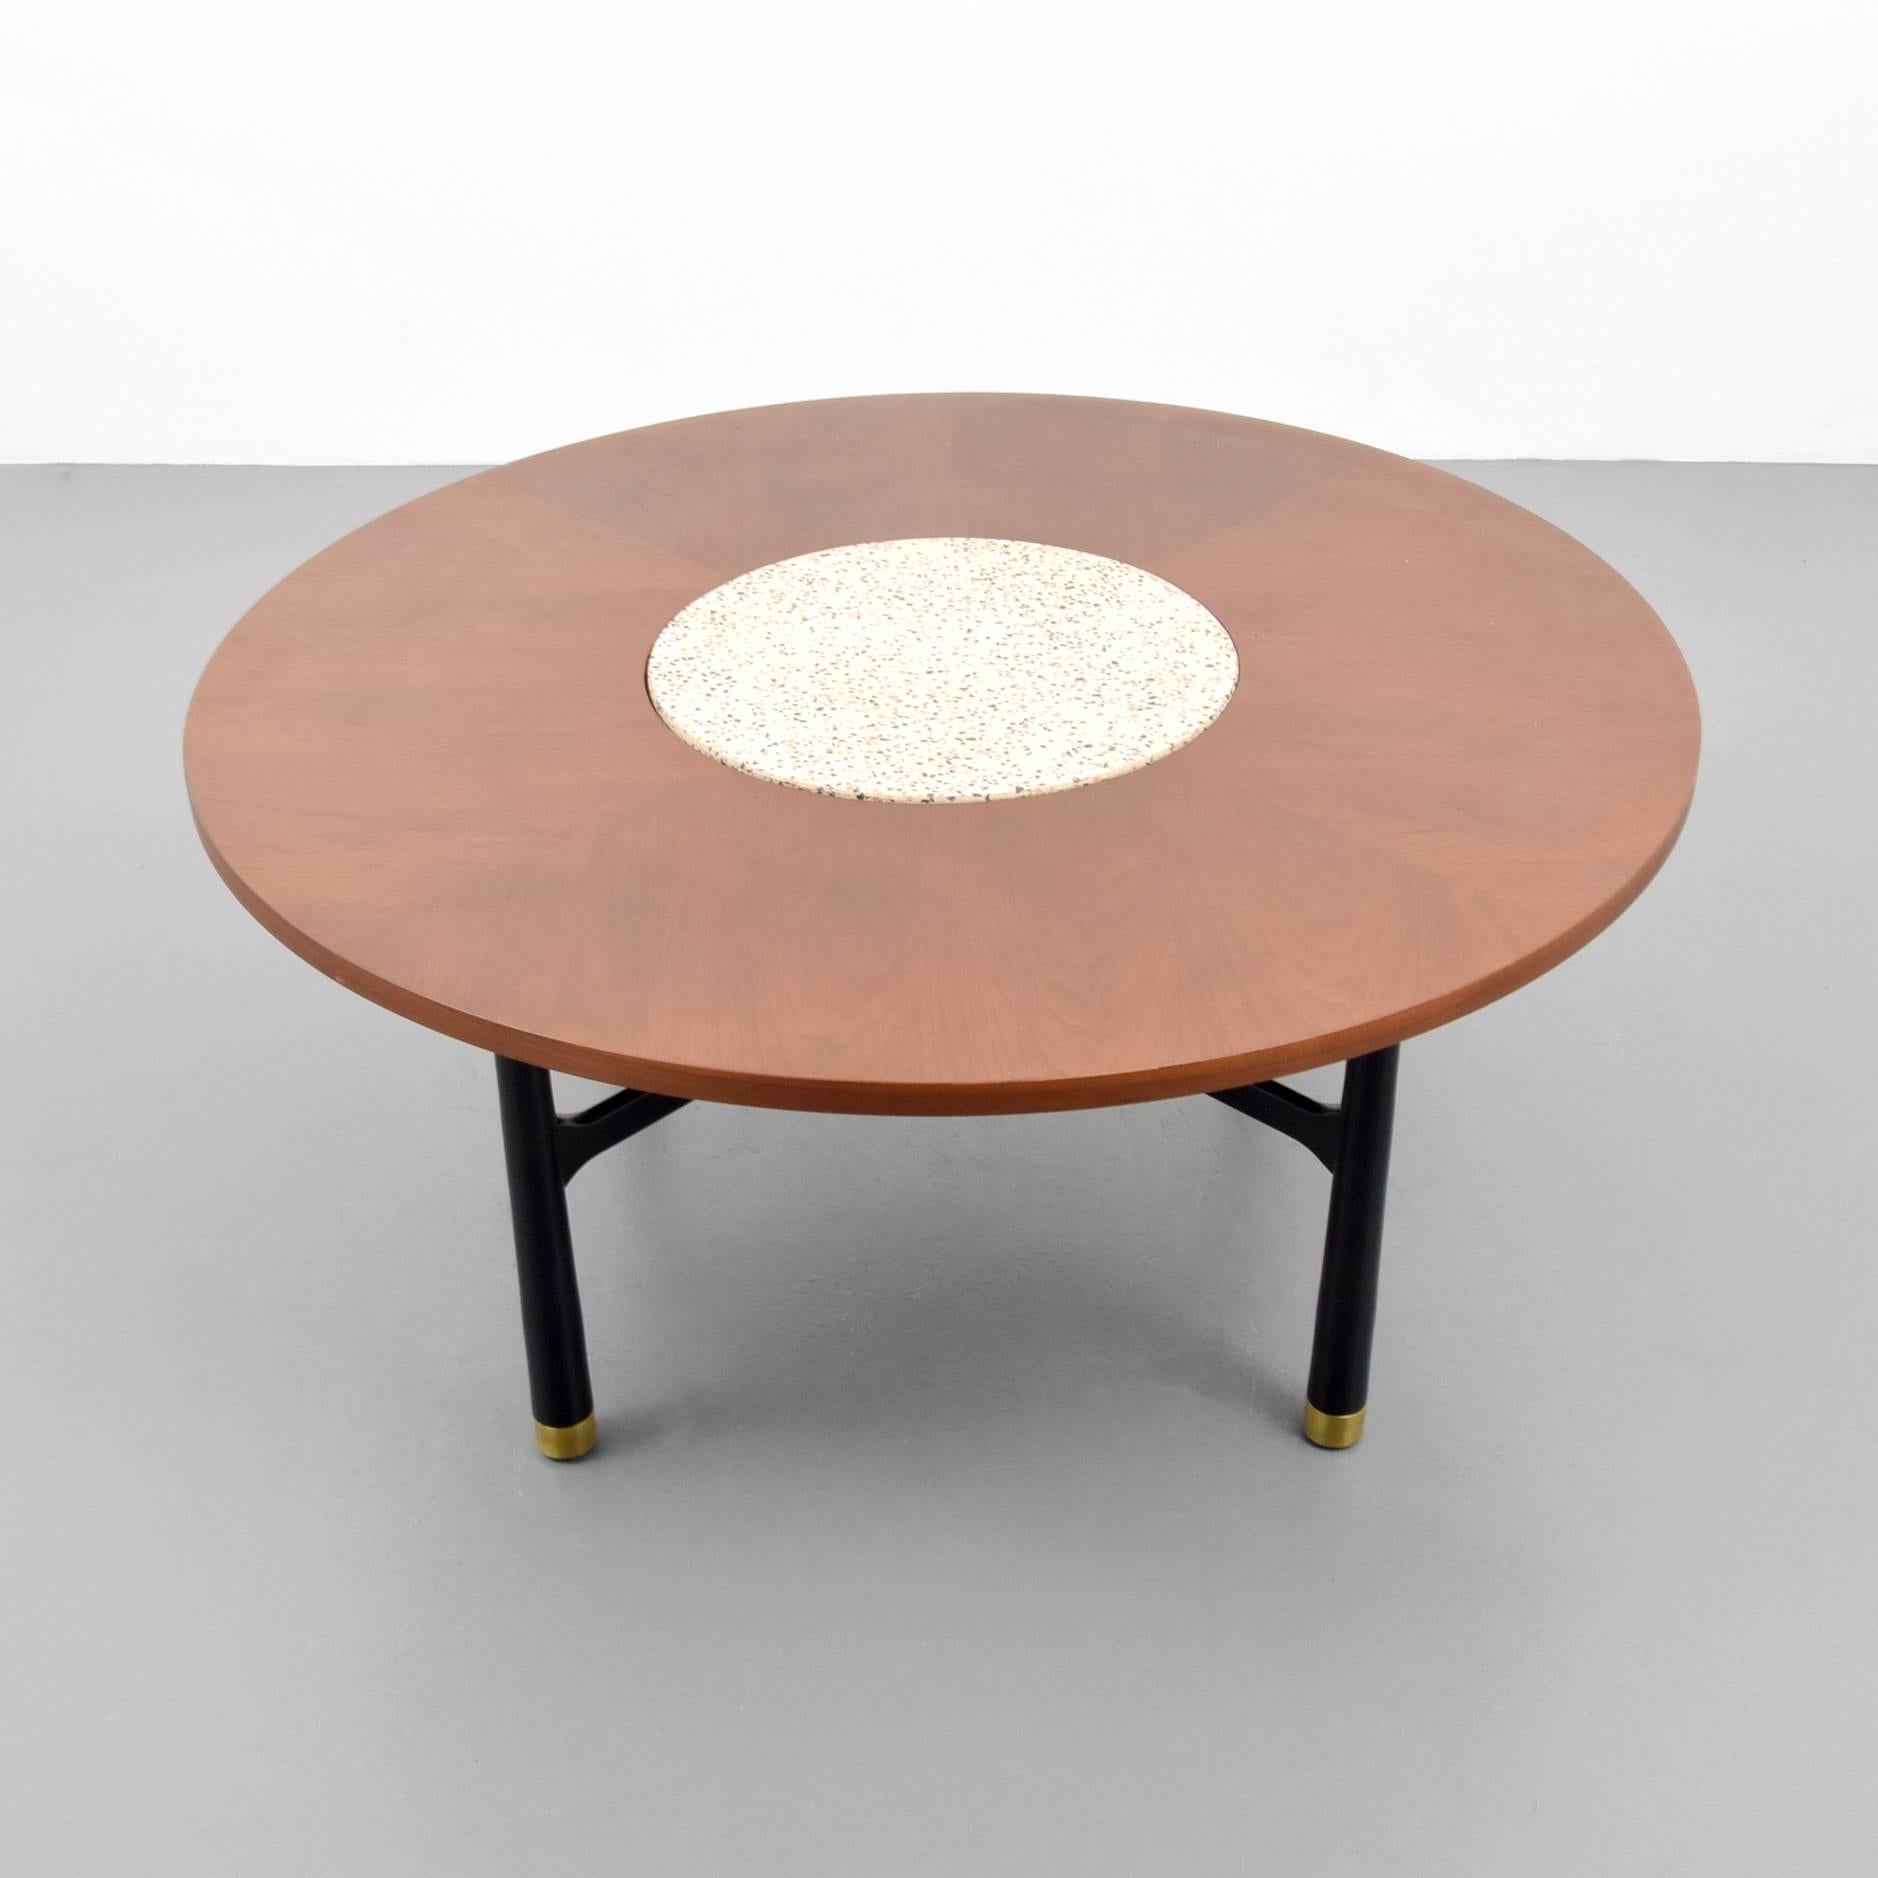 Coffee table with terrazzo insert and brass sabots by Harvey Probber.

Harvey Probber preferred simple lines in his designs. He would often use hardware and color in upholstery or wood to add contrast and emphasize the details.  He was known for his